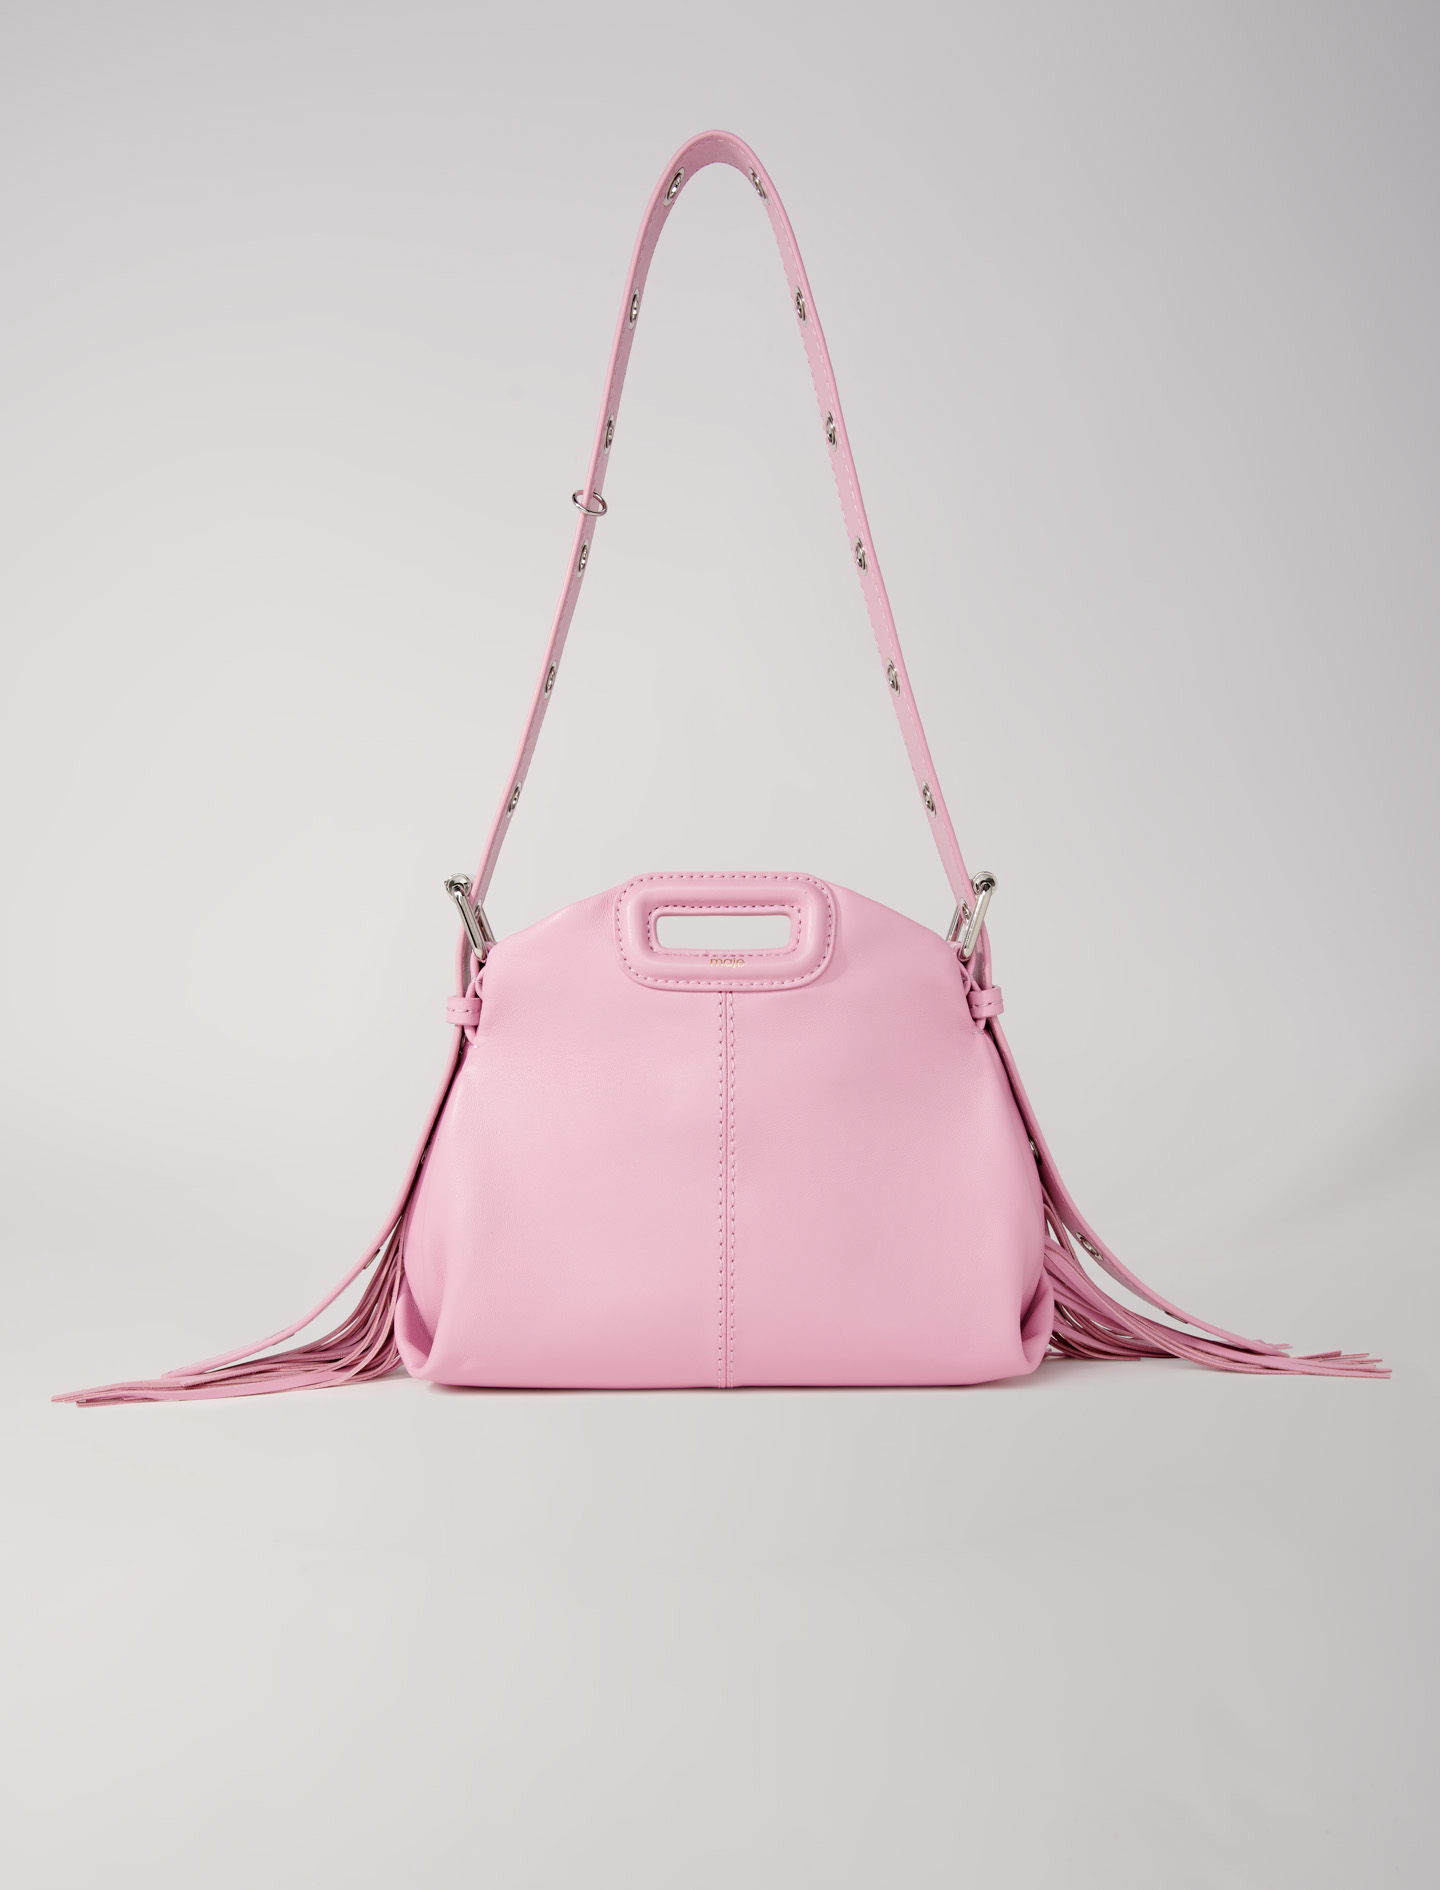 Maje Woman's cotton Leather: Smooth leather mini Miss M bag for Spring/Summer, in color Pink / Red